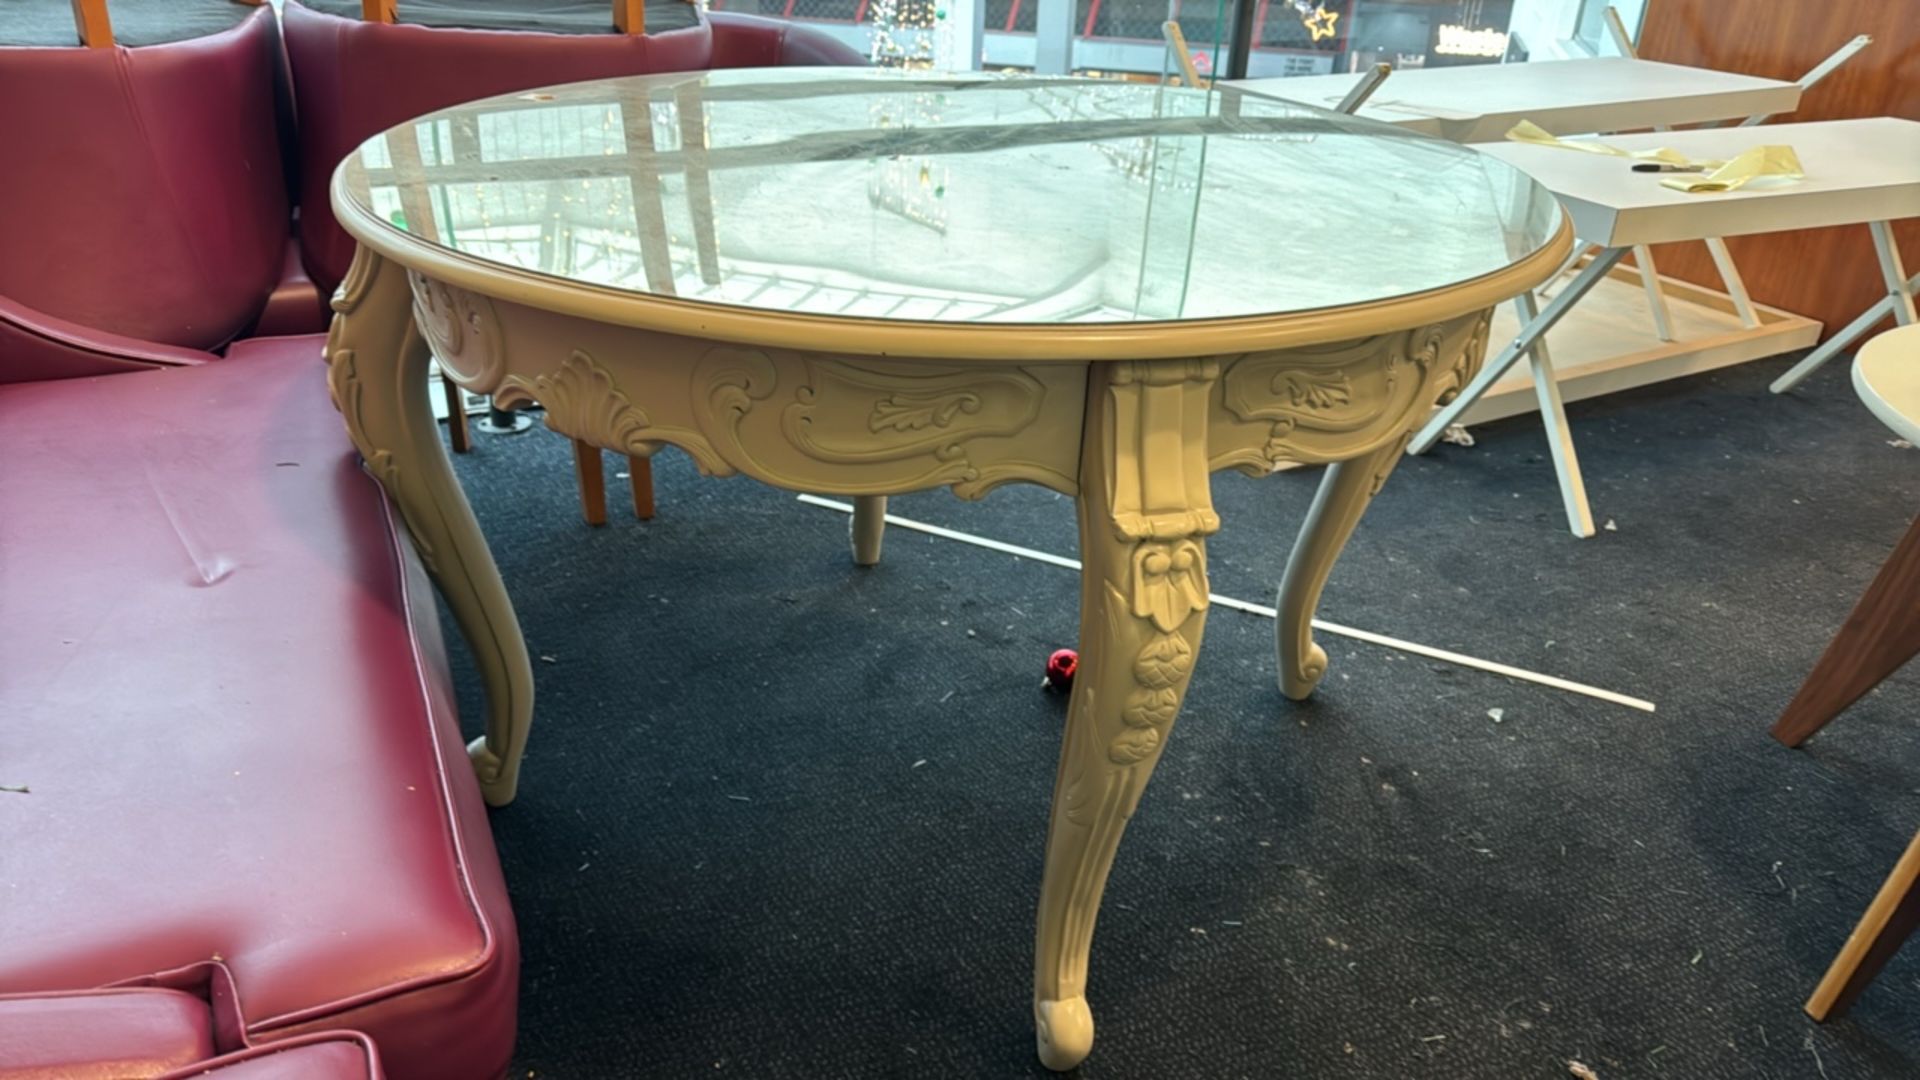 Circular Wood Table with Mirrored Glass Top - Image 4 of 4